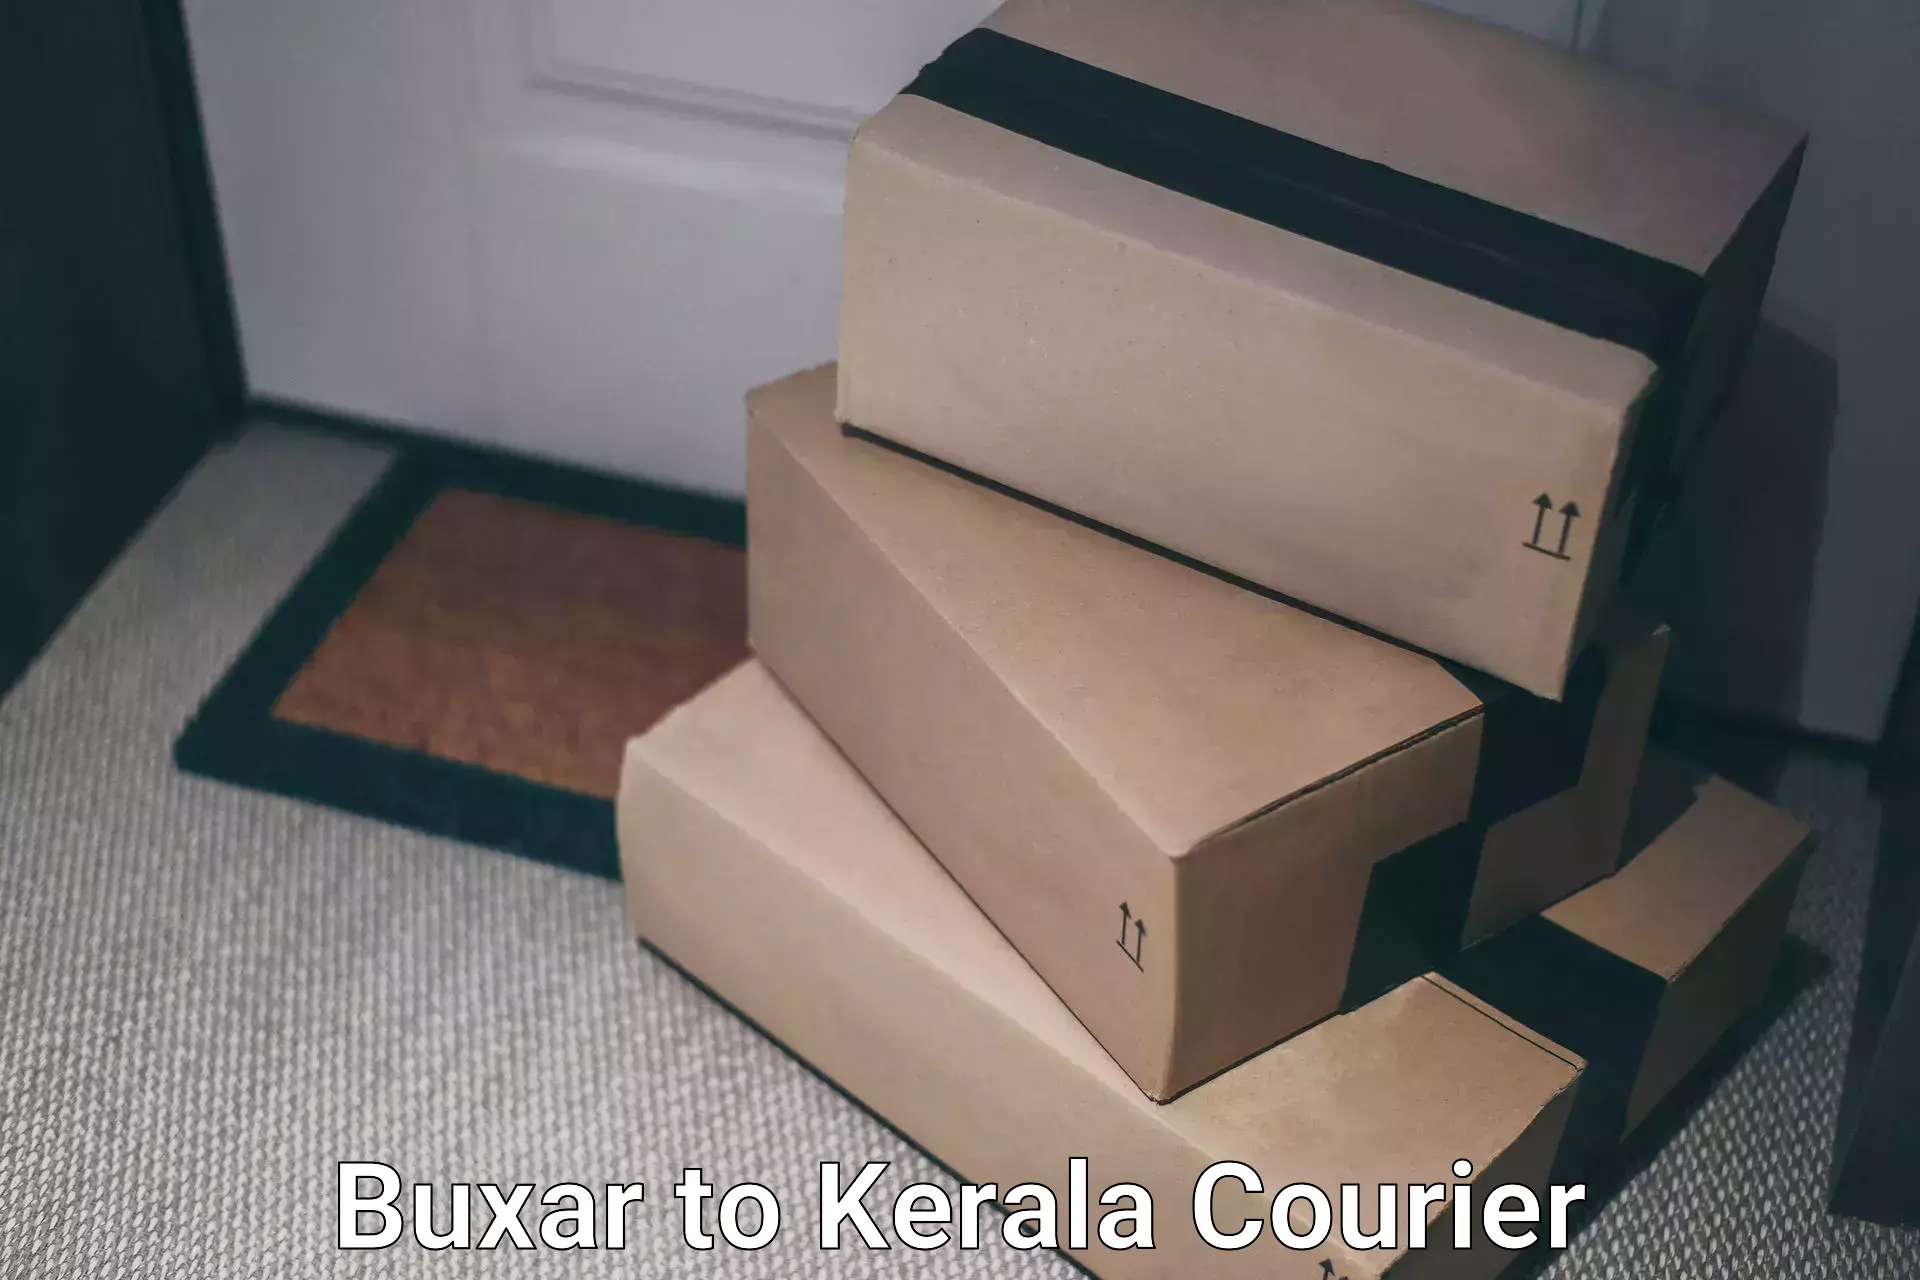 Reliable package handling Buxar to Cochin University of Science and Technology